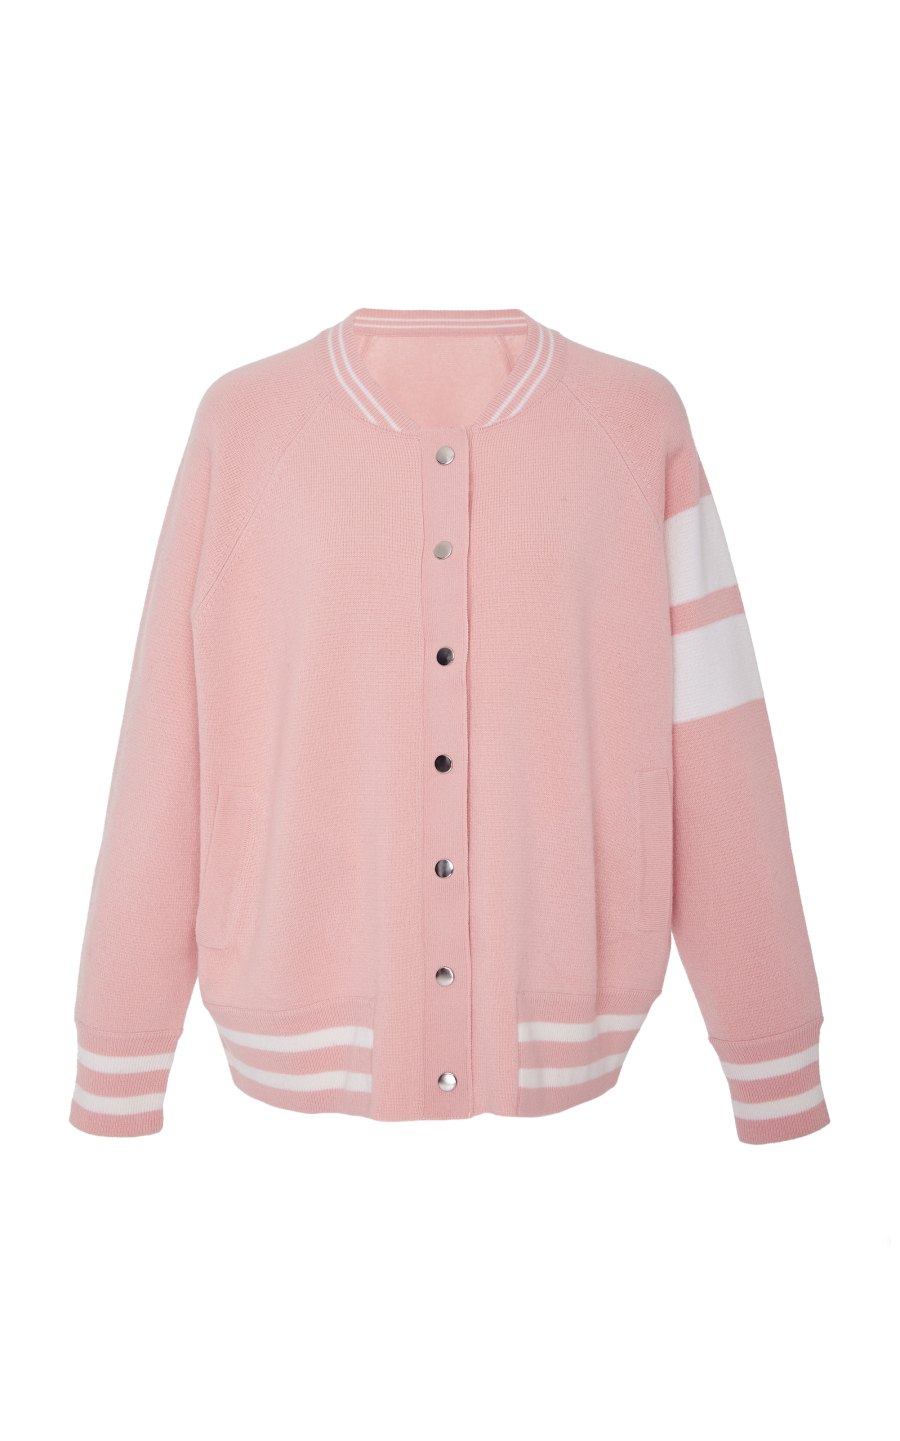 large_zoe-jordan-pink-m-o-exclusive-edison-wool-and-cashmere-blend-bomber-jacket